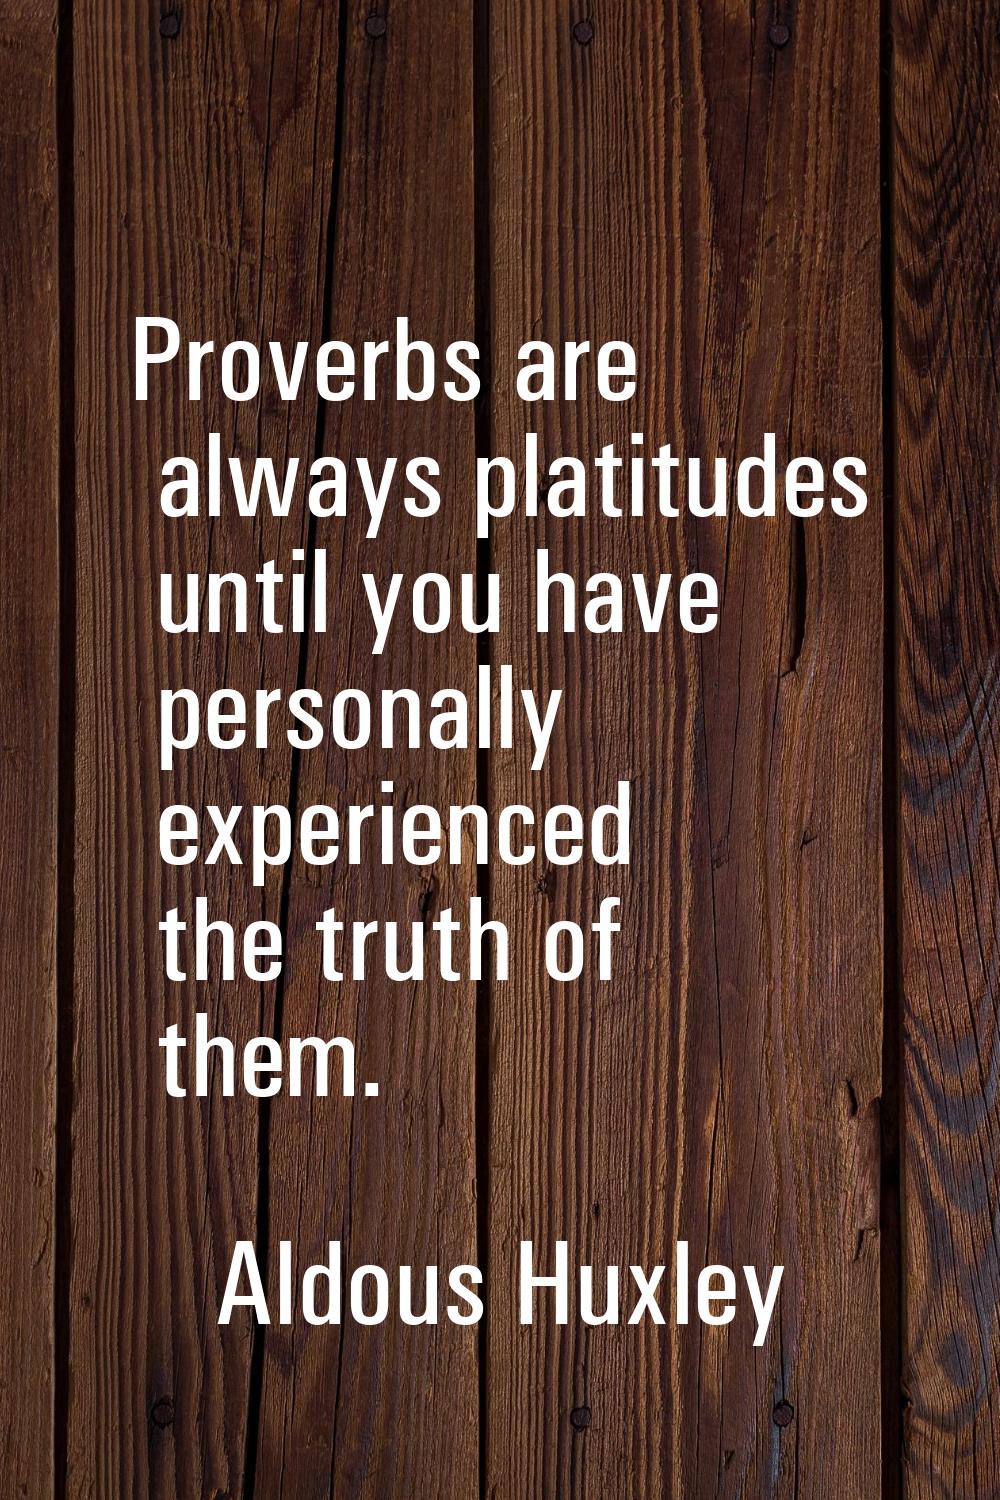 Proverbs are always platitudes until you have personally experienced the truth of them.